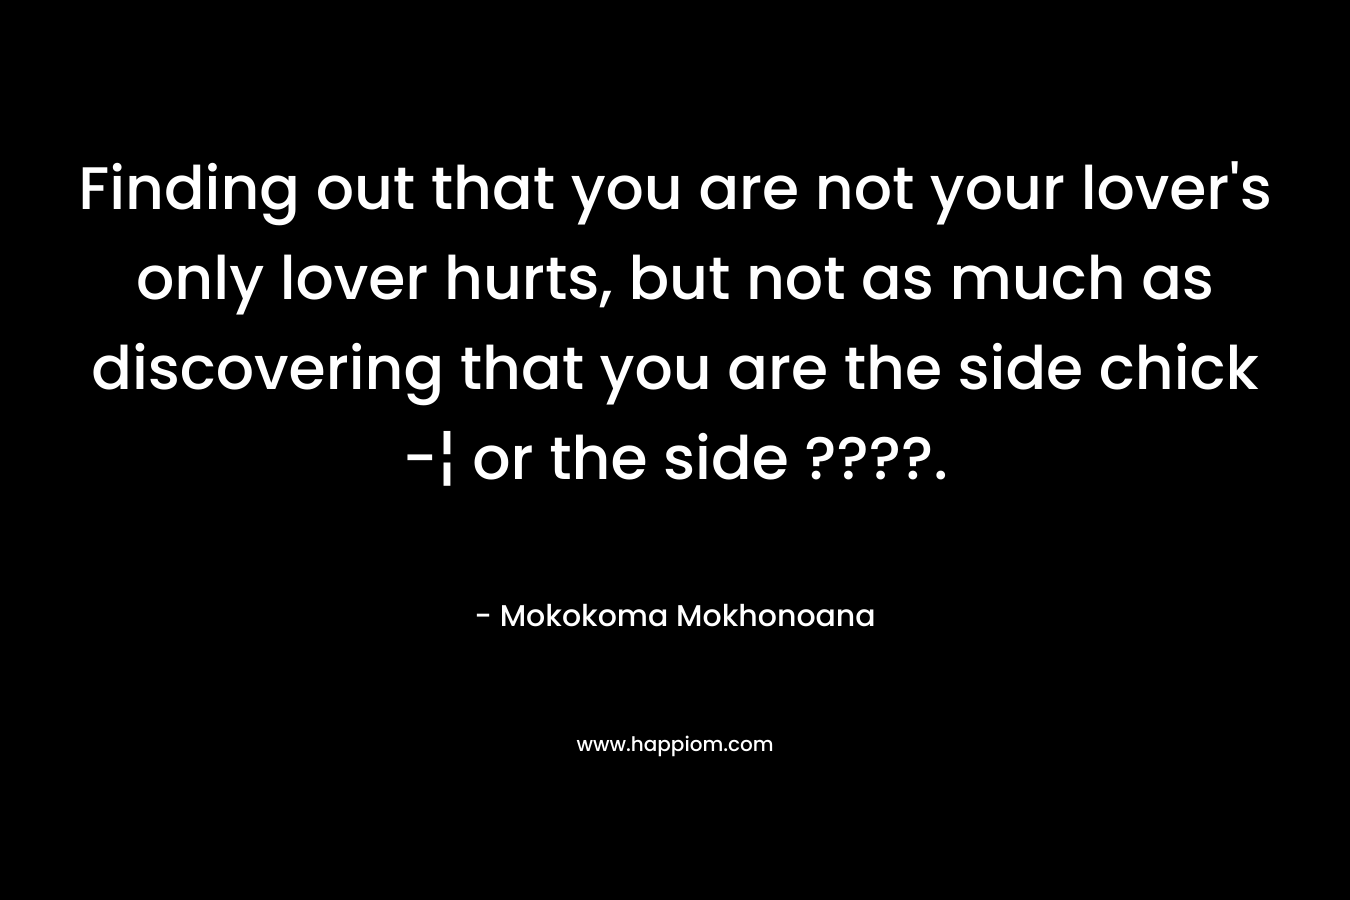 Finding out that you are not your lover’s only lover hurts, but not as much as discovering that you are the side chick -¦ or the side ????. – Mokokoma Mokhonoana